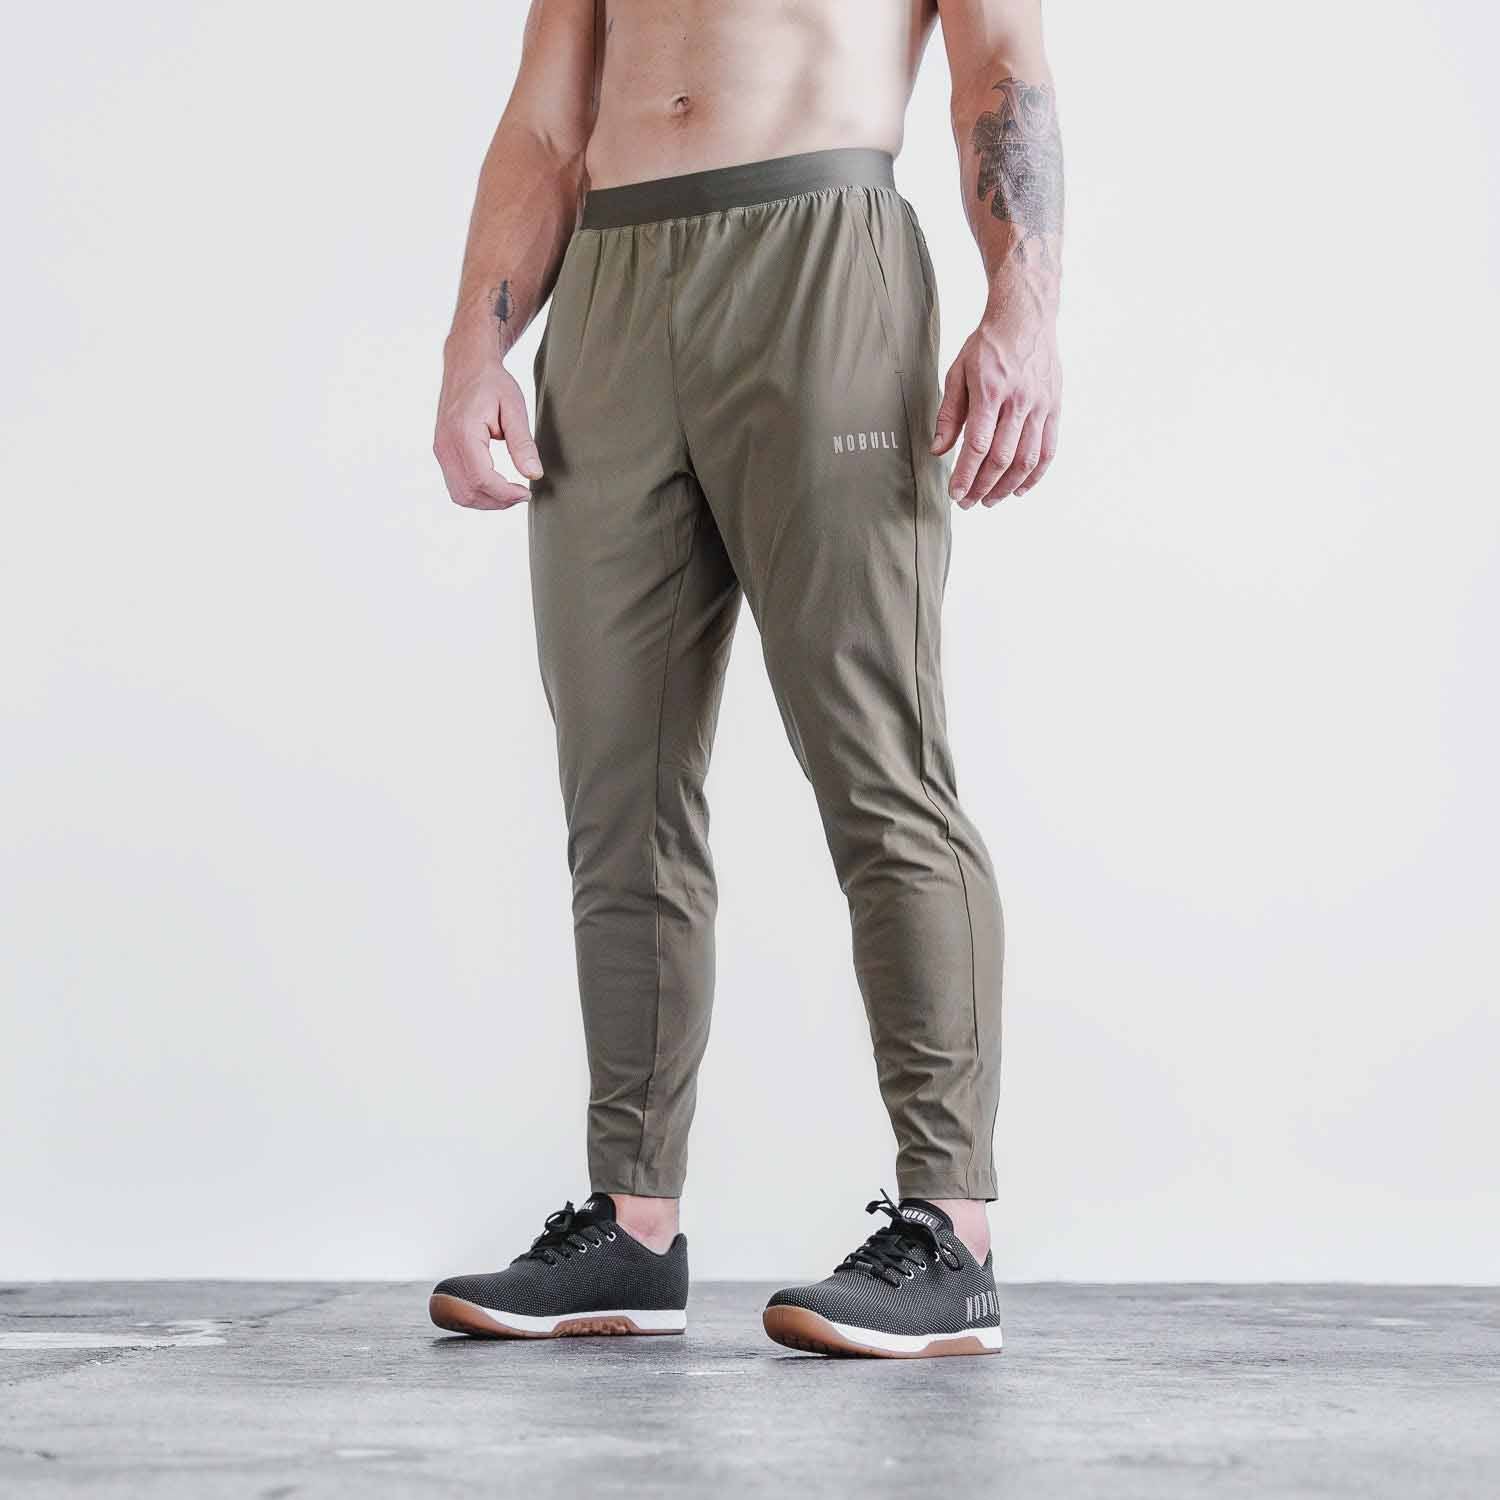 s Best-Selling Joggers Are the Most Comfortable Pants Shoppers  Own, and They're Now $15